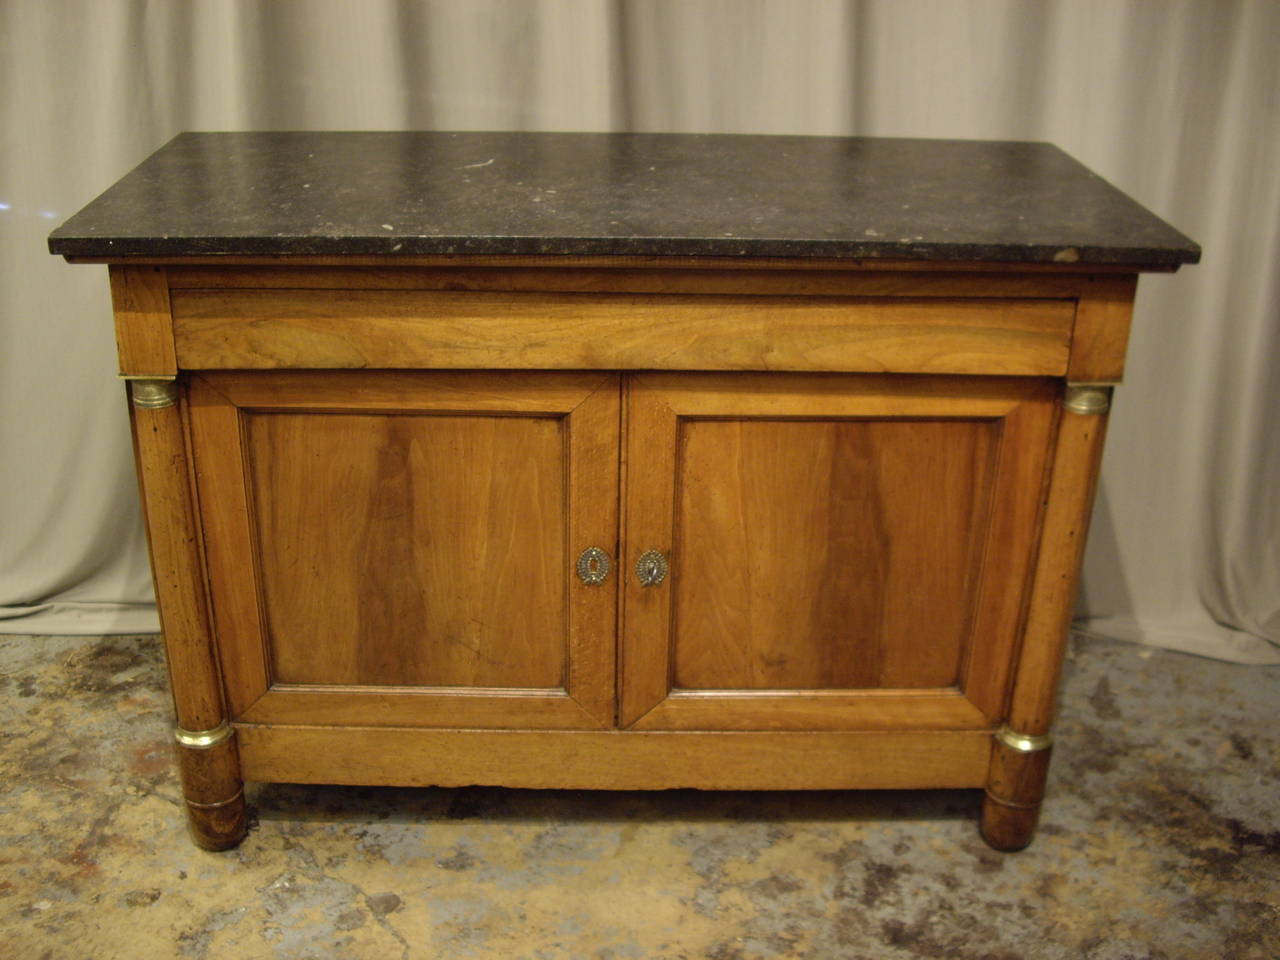 Honey colored patina French Empire walnut buffet with black marble top.